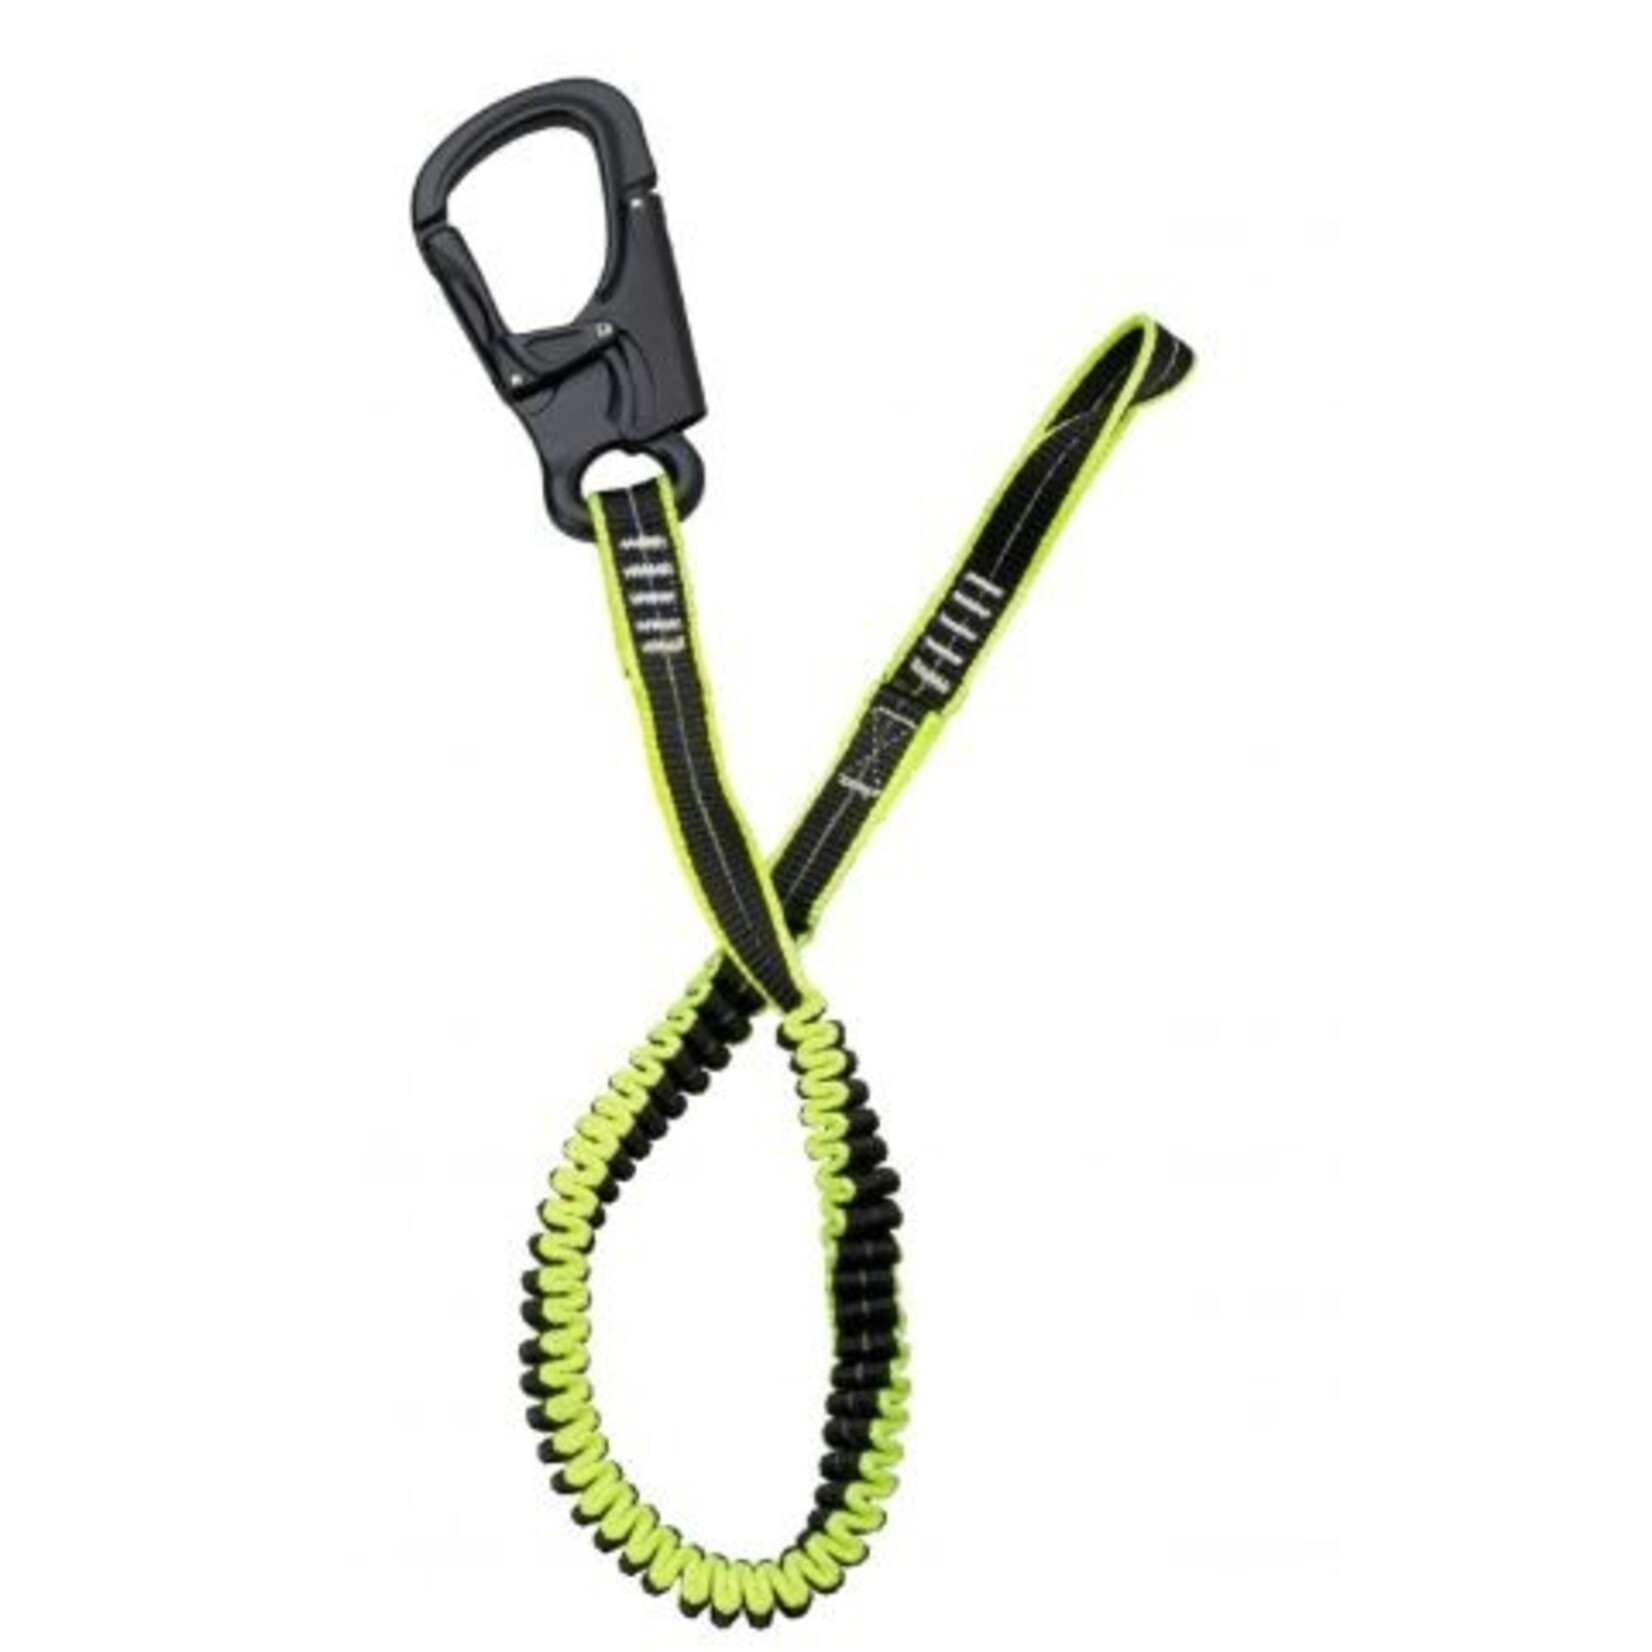 Plastimo Elastic tether 1 technical safety hook